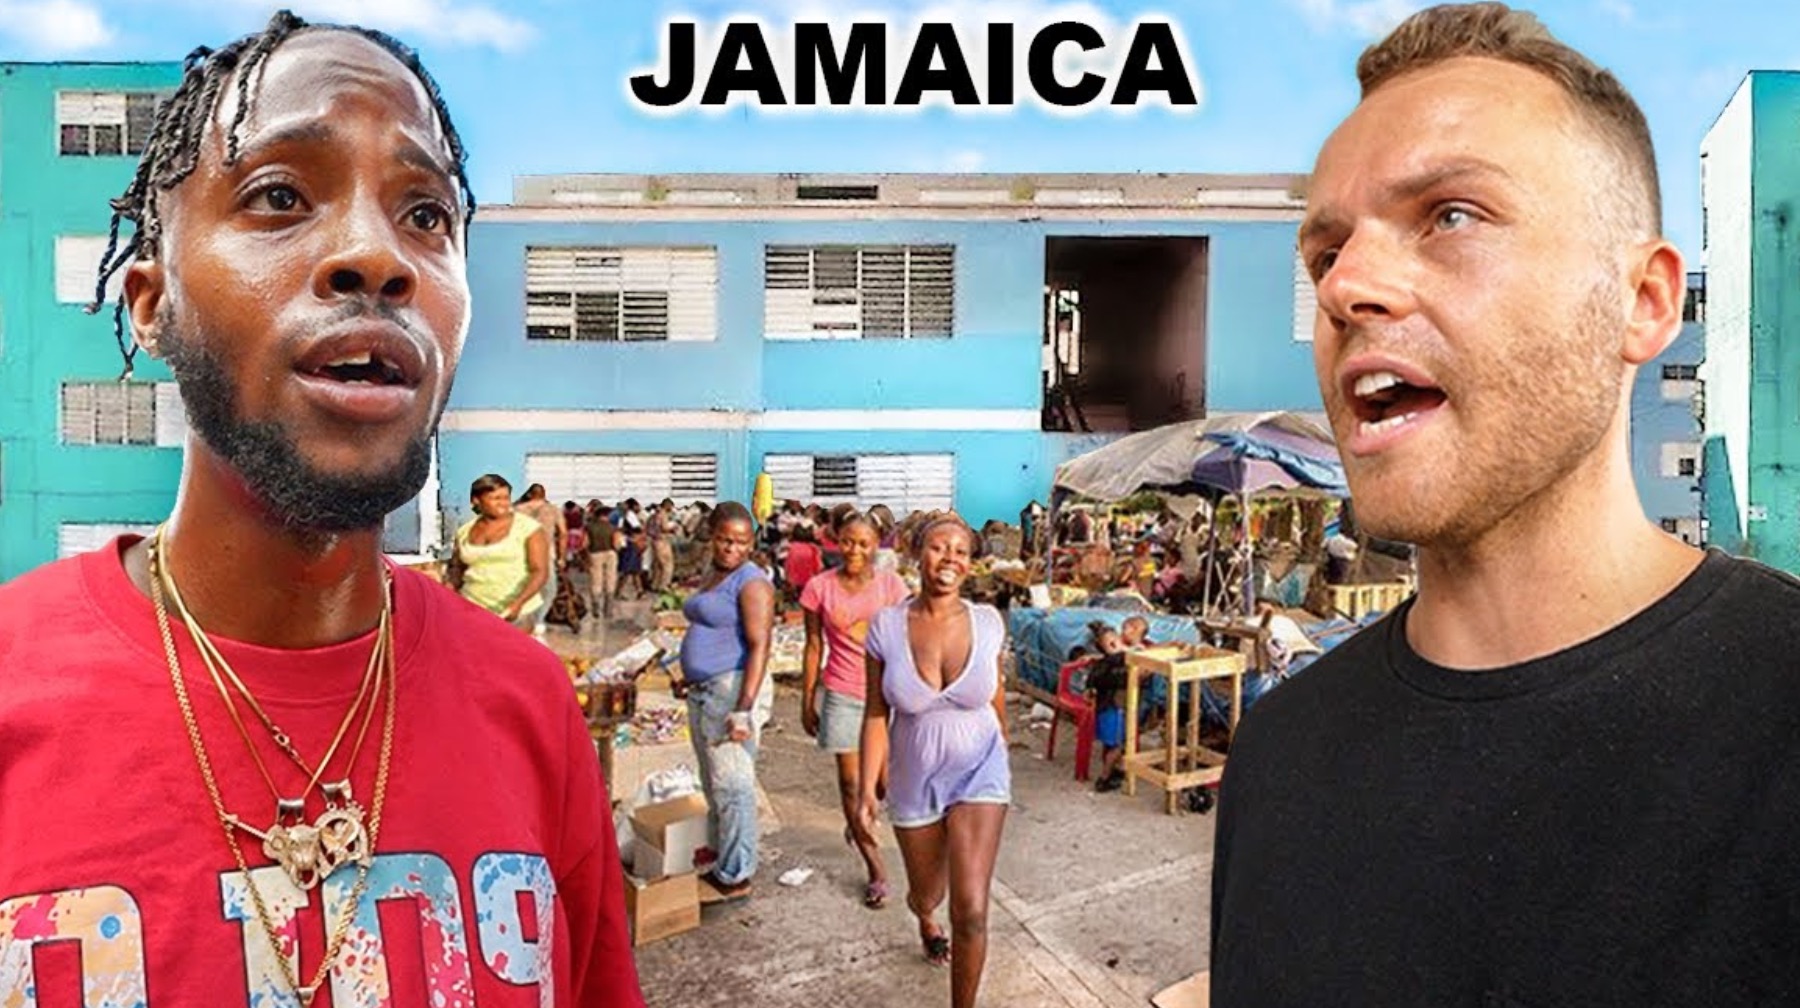 Documentary Shows Inside Look Into The Two Sides Of Kingston, Jamaica - Watch Video